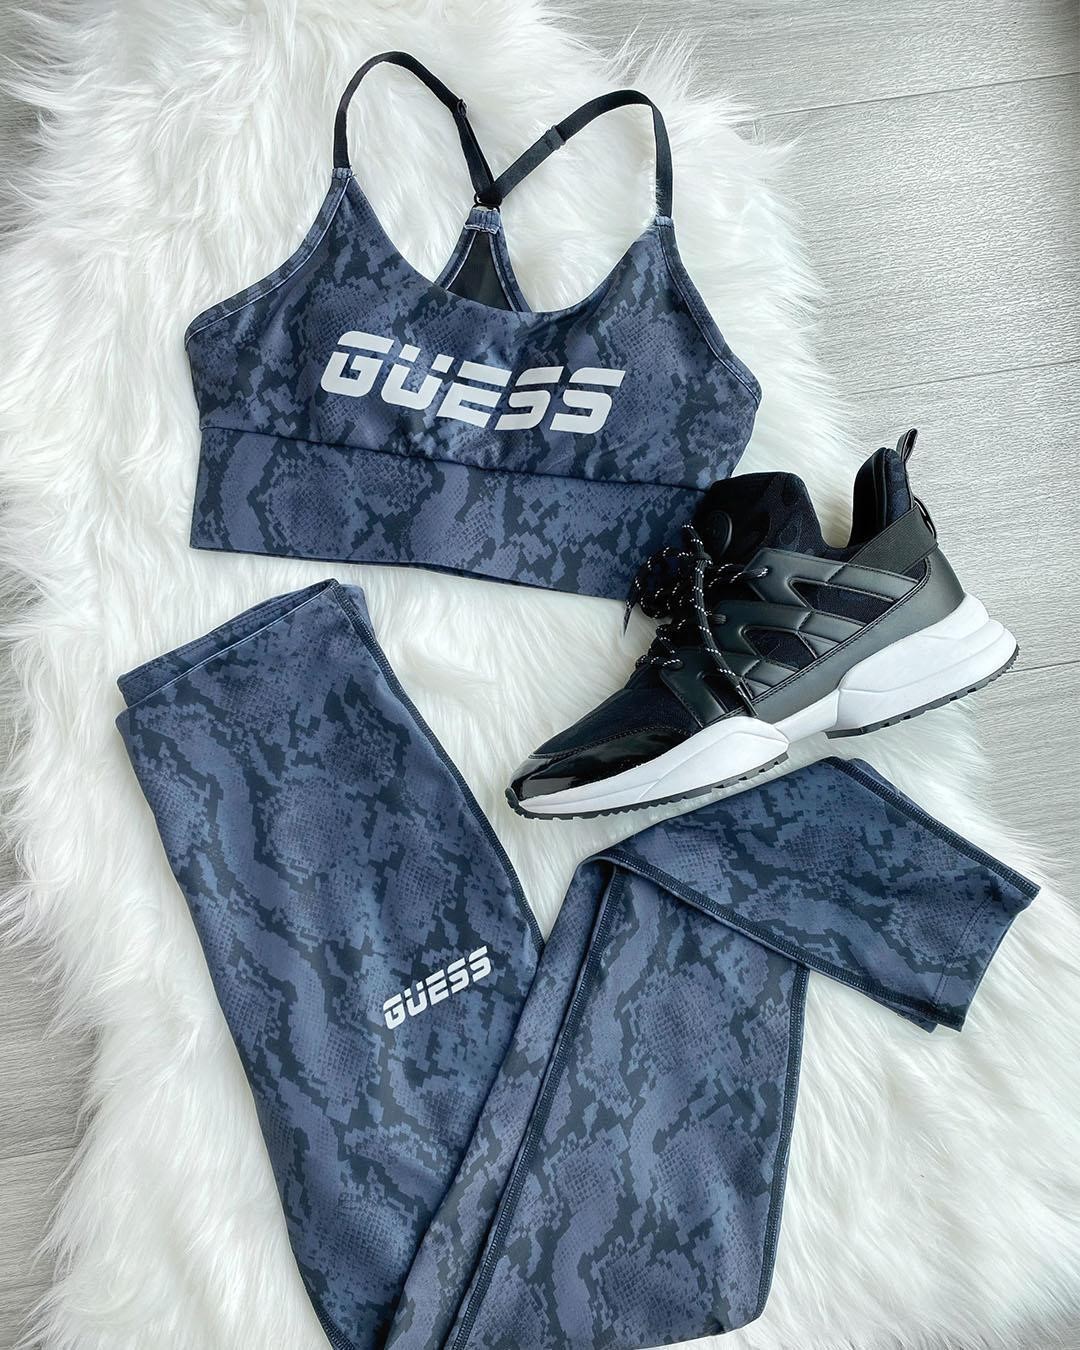 GUESS - reminder: working out increases serotonin 😊 tap to shop this set for the ultimate mood booster #GUESSActive